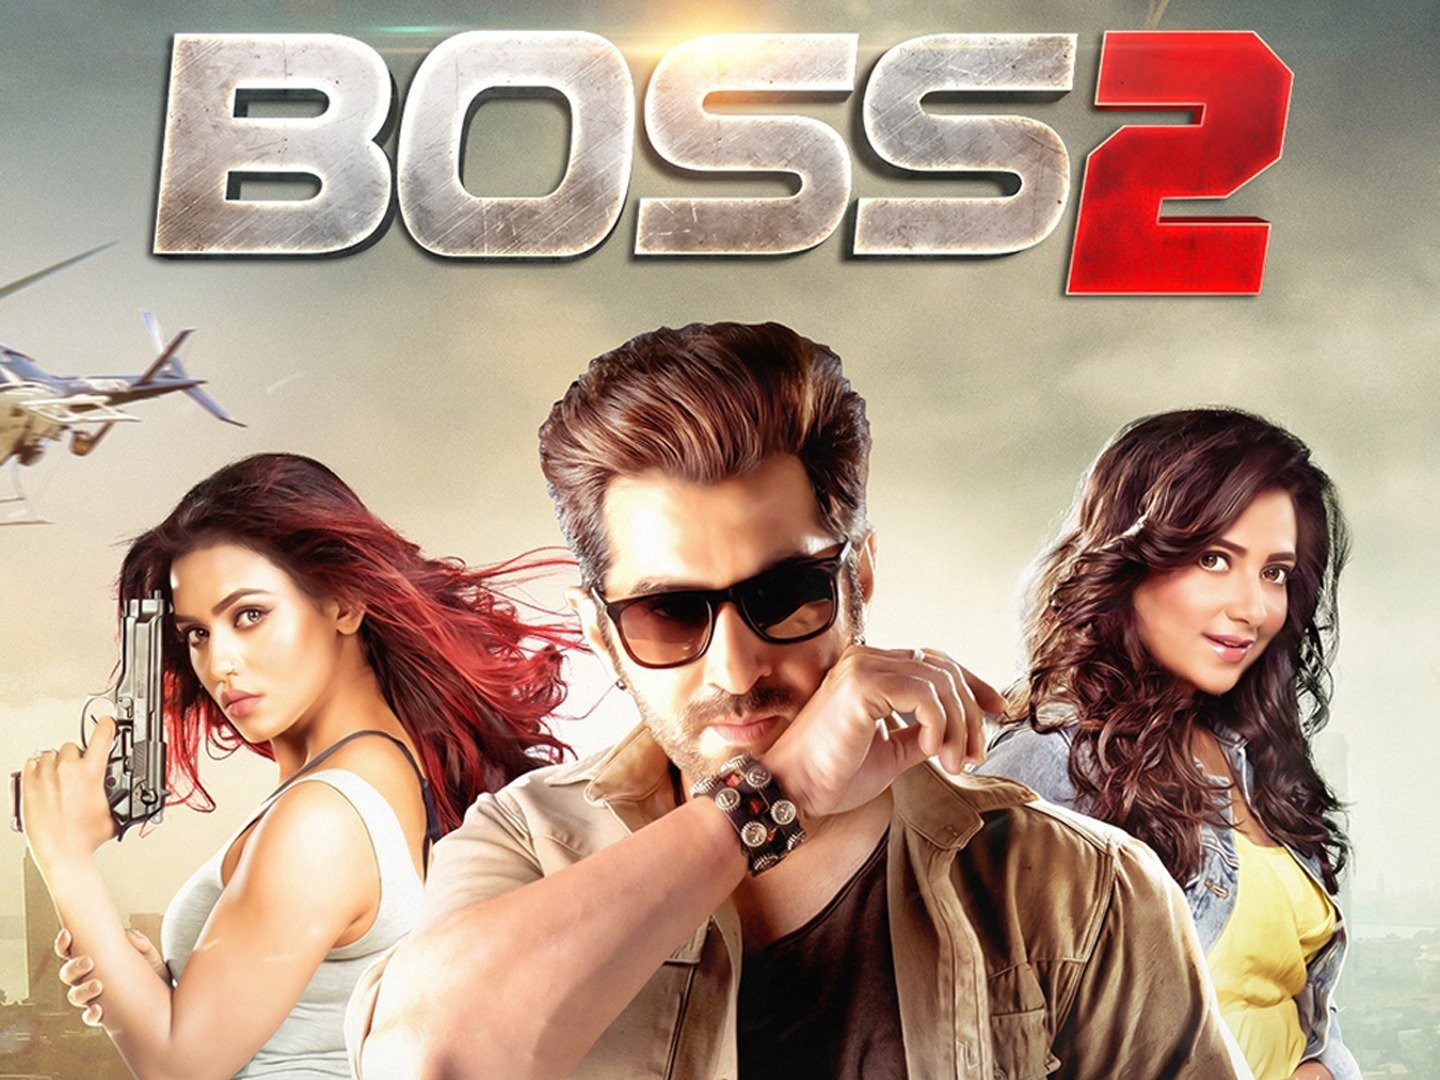 Boss 2 Pictures picture